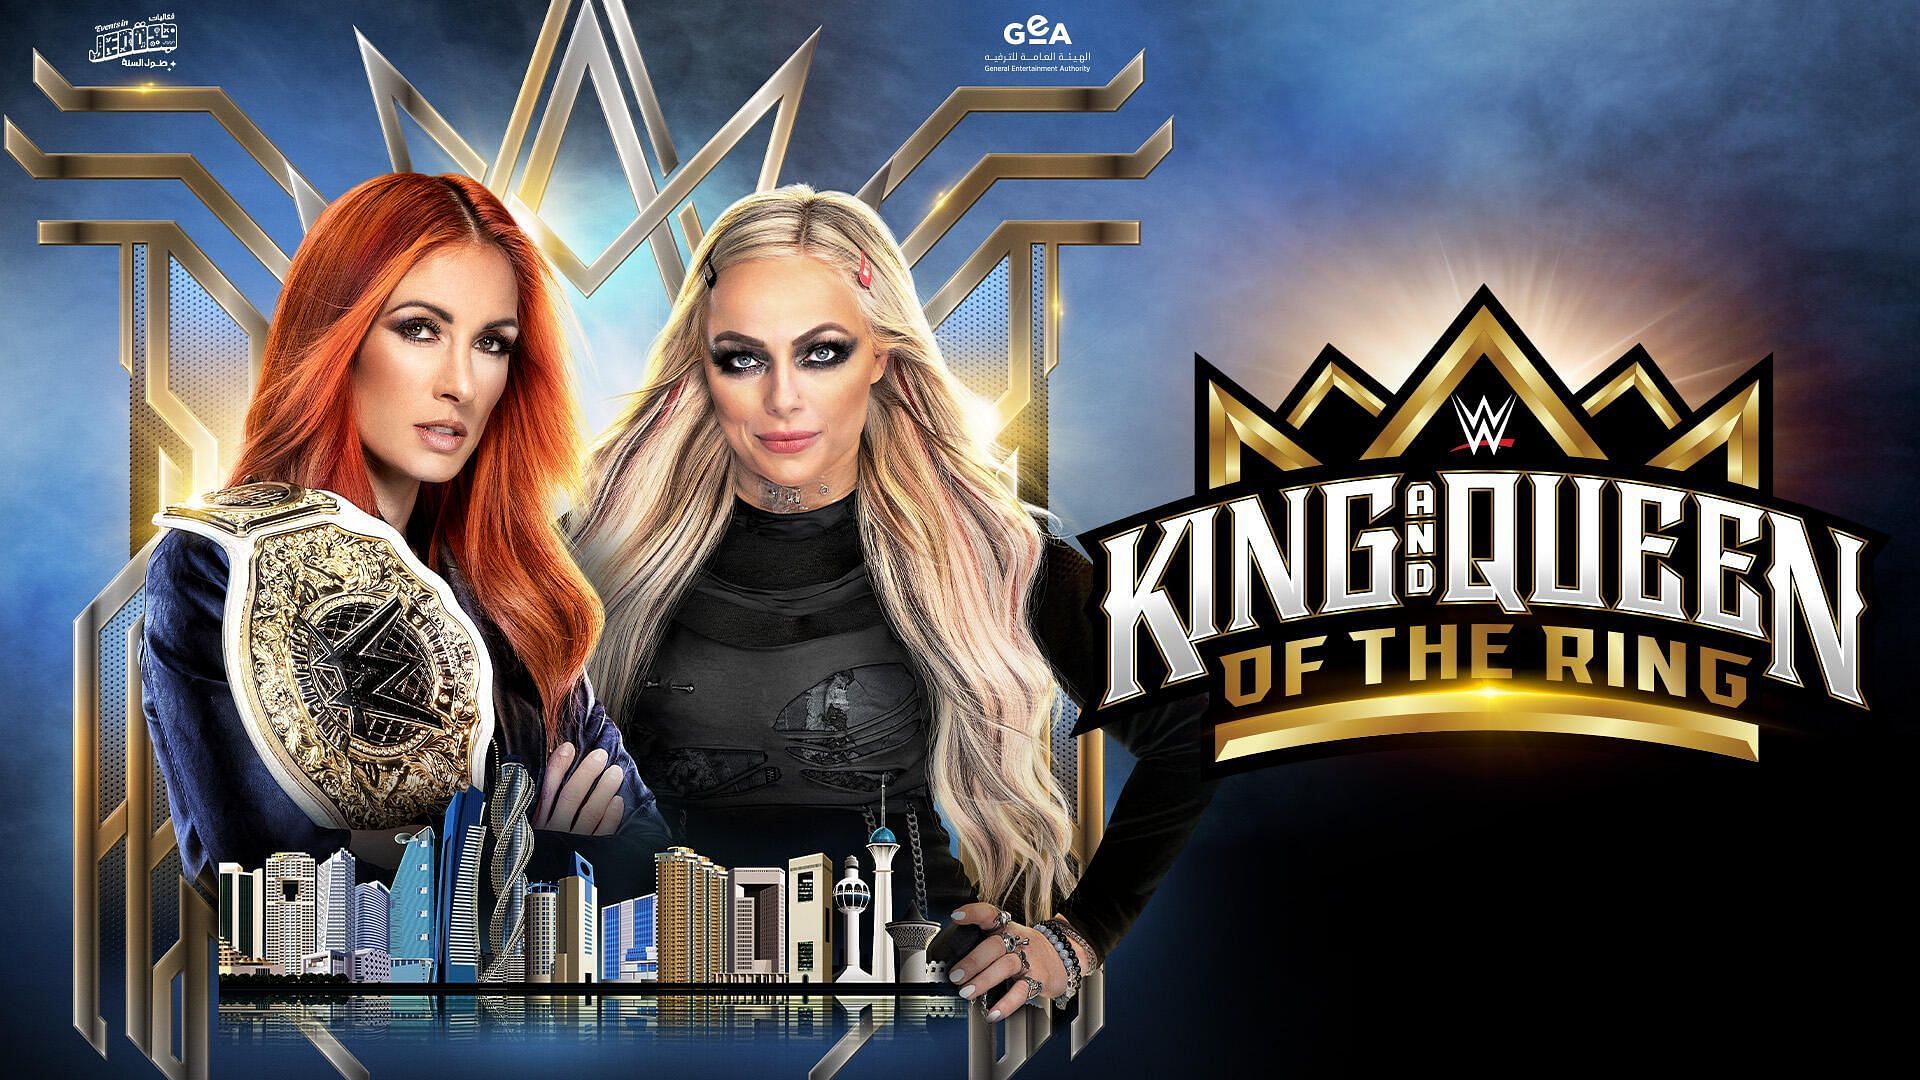 Becky Lynch and Liv Morgan will collide at the King and Queen ofthe Ring PLE (Photo credit: WWE.com)